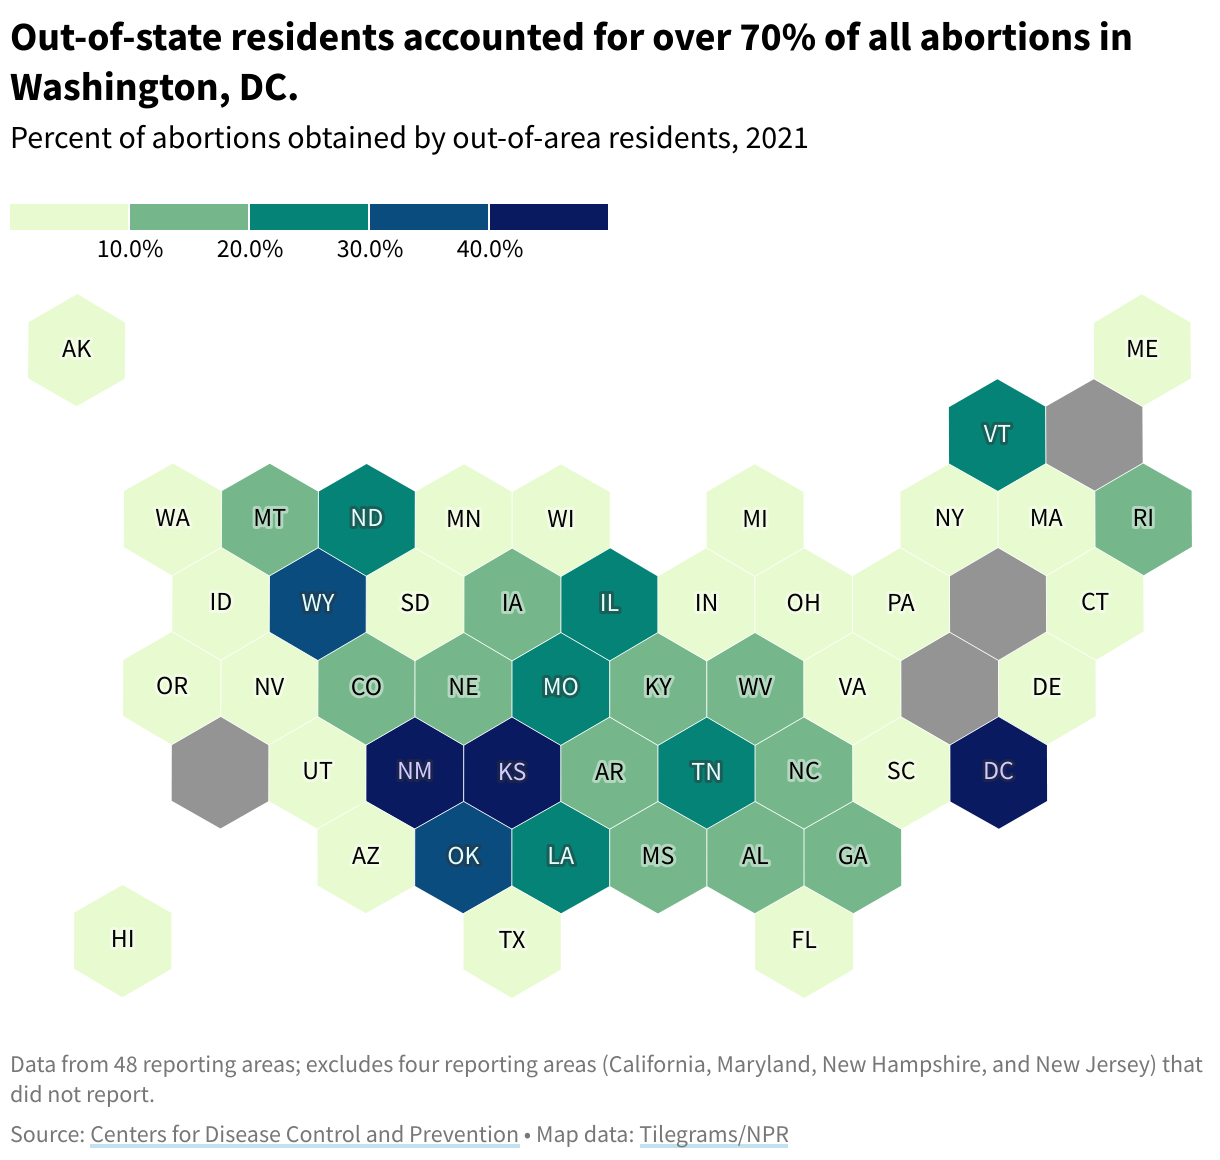 A map of the US illustrating the number of reported abortions by out-of-area residents by state. 